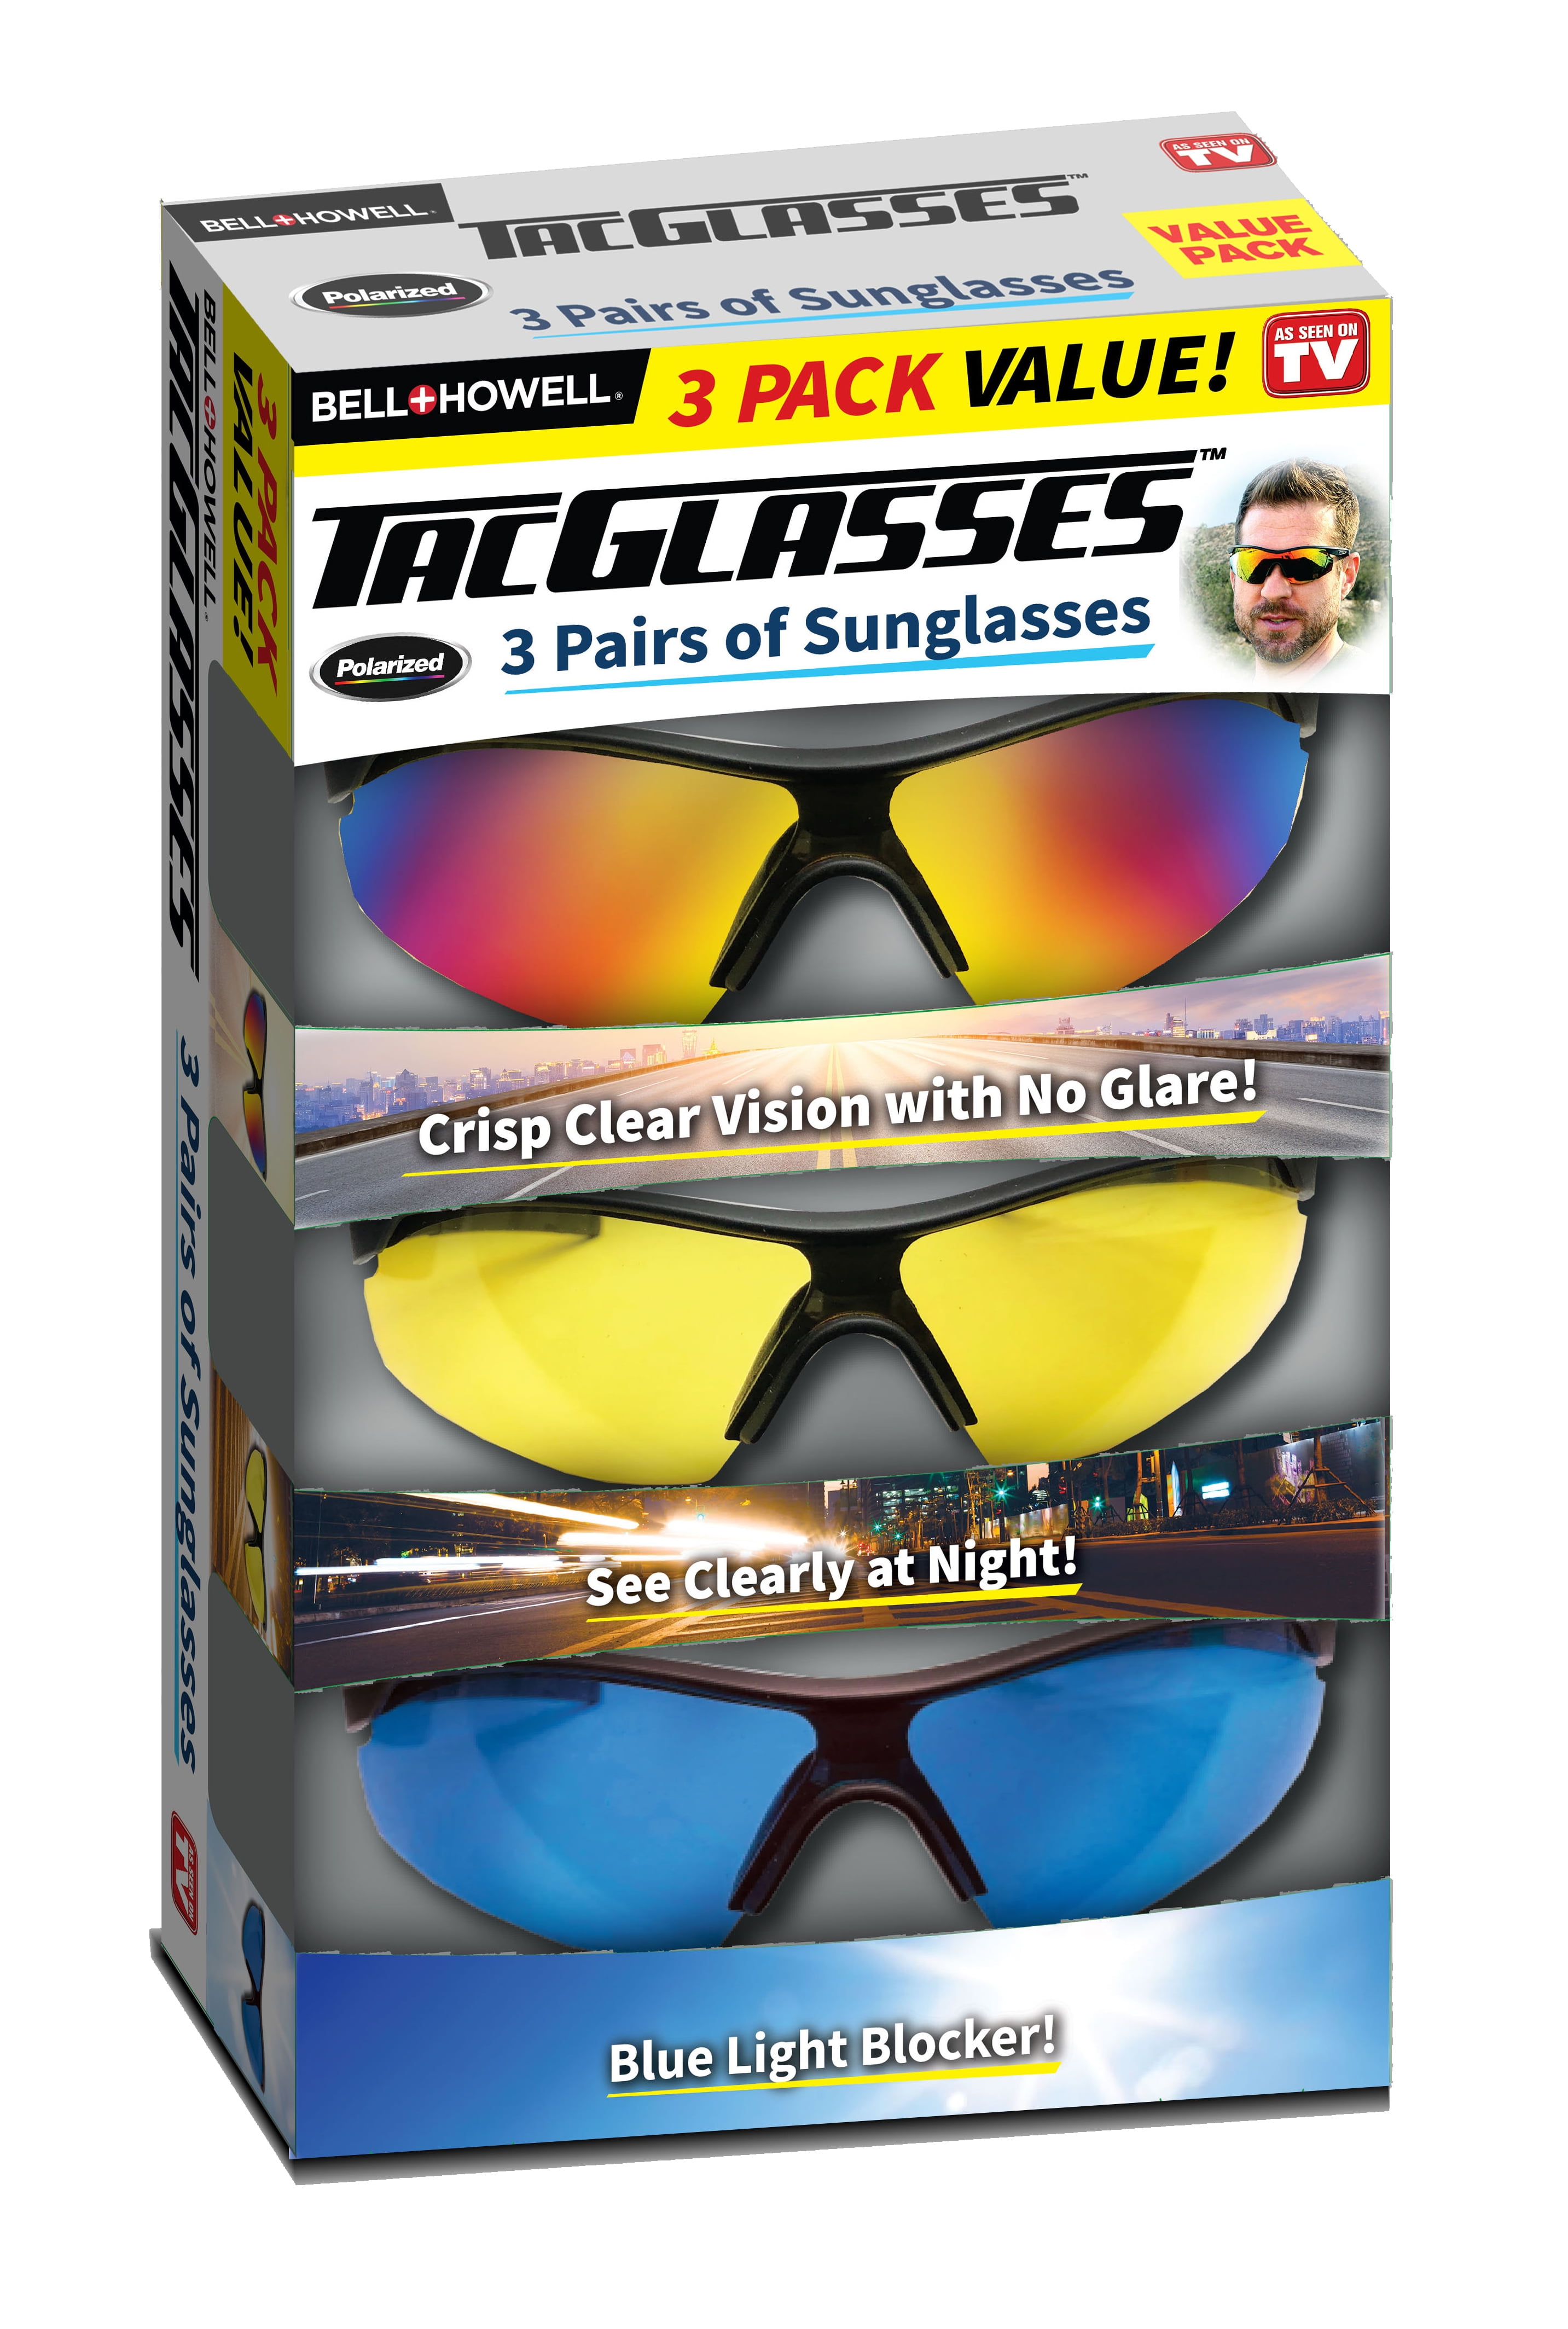 Mighty Sight LED Magnifying Glasses Fits over Prescription Eyewear, as Seen  On TV